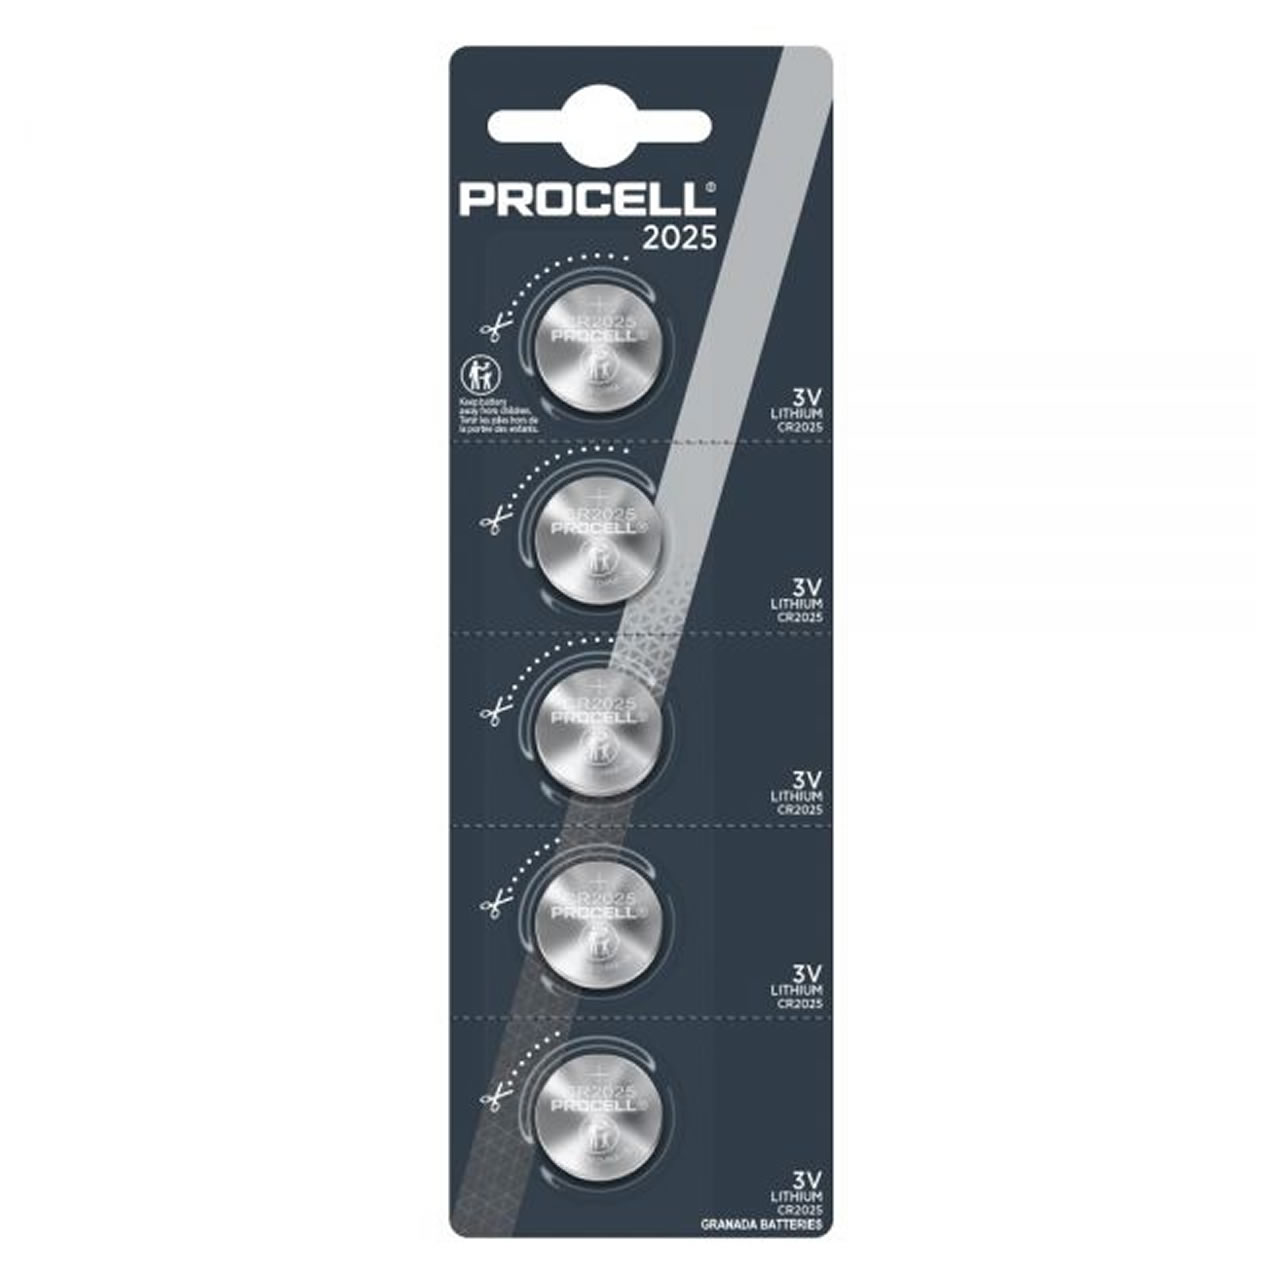 Procell Lithium Coin Cell Battery CR2025 (Pack of 5)